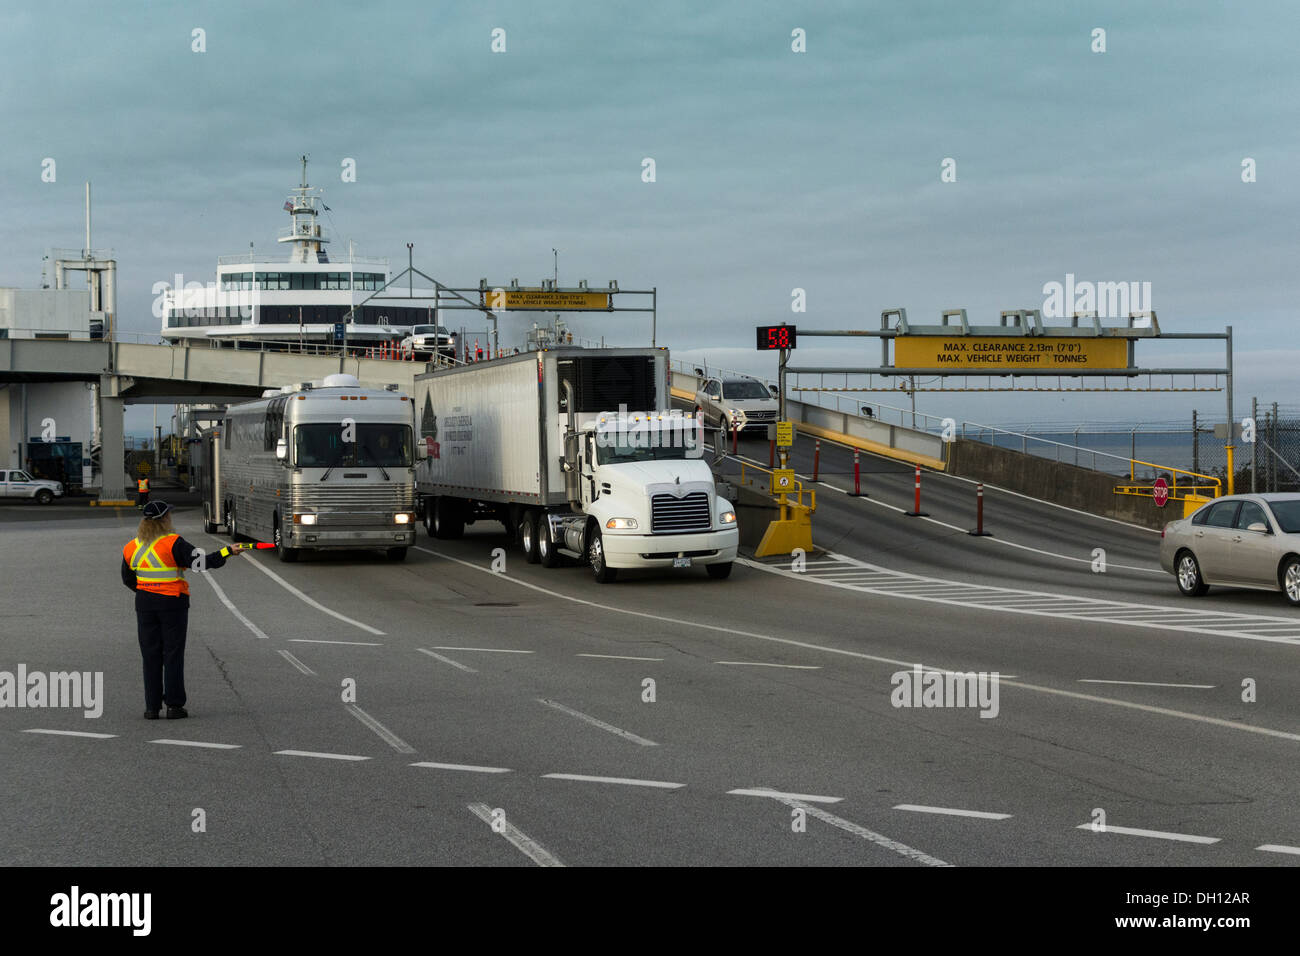 Lorries, trucks, buses and cars unloading at Tsawwessen ferry terminal, British Columbia, Canada Stock Photo